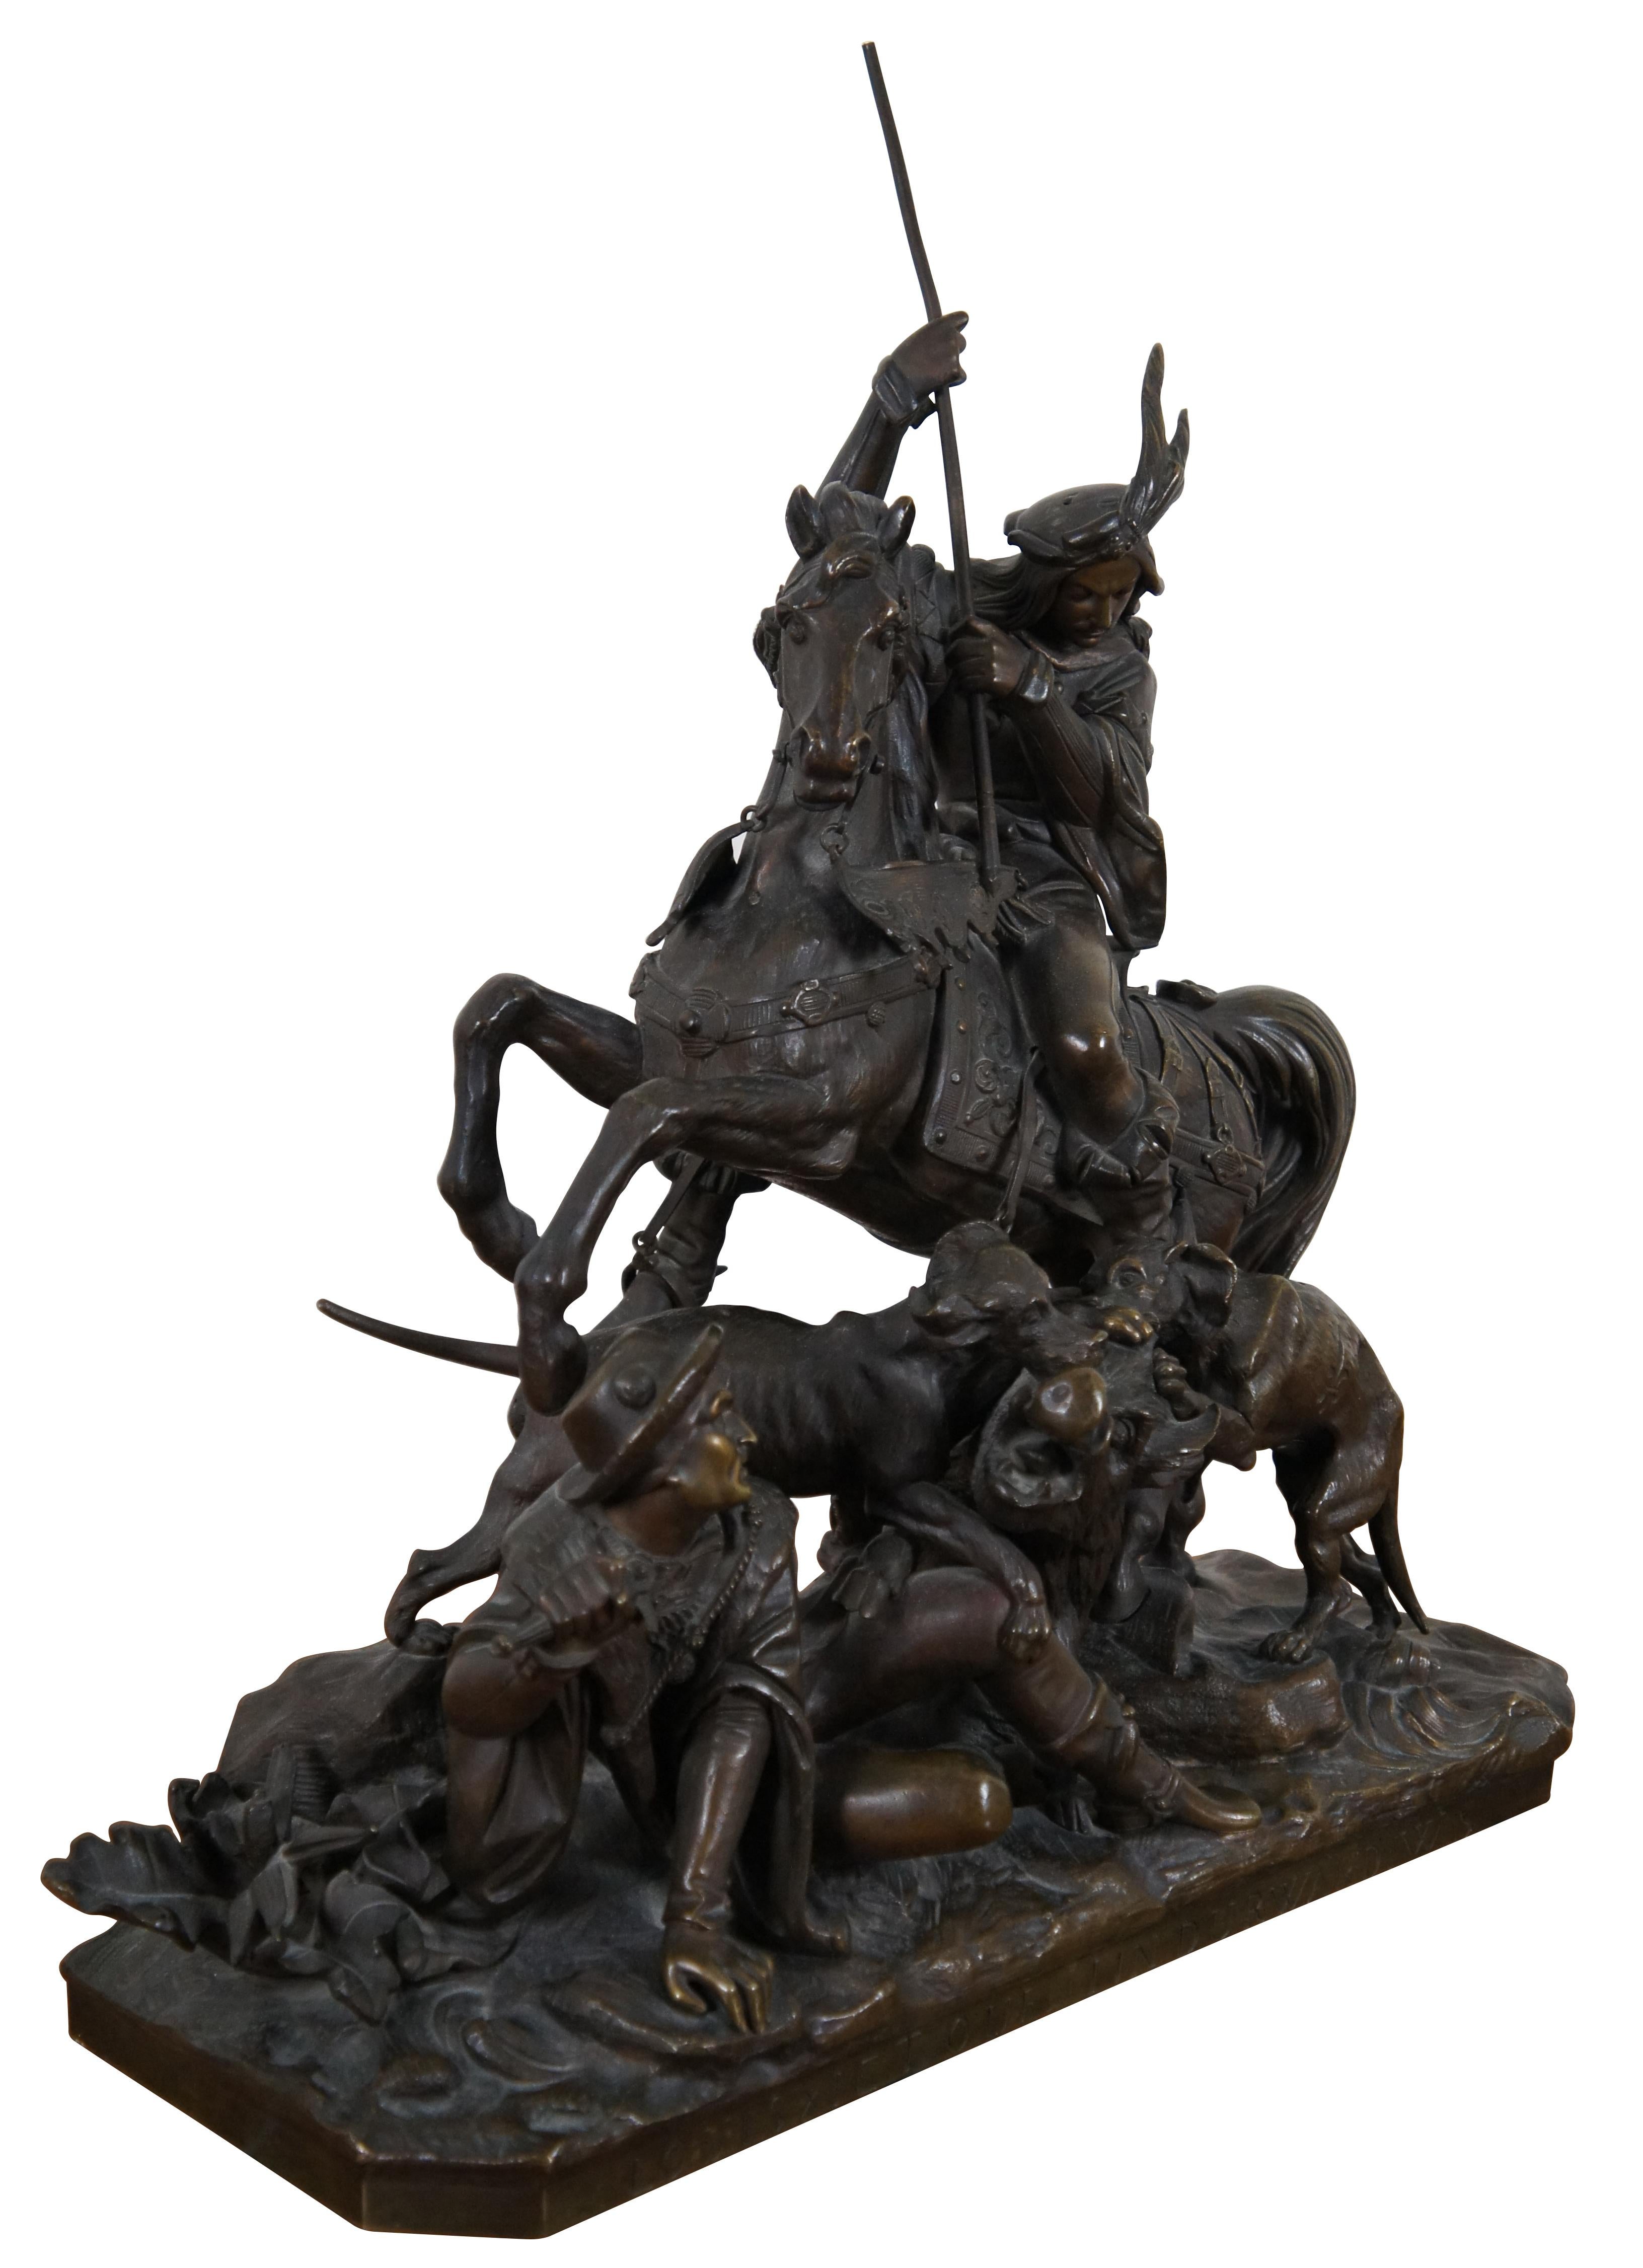 Antique Tiffany & Co number 2114 bronze sculpture portraying a scene from Quentin Durward. Written by Walter Scott and published in 1823, Quentin Durward is the story of a young Scottish archer who journeys to France and upon meeting Louis XI enters